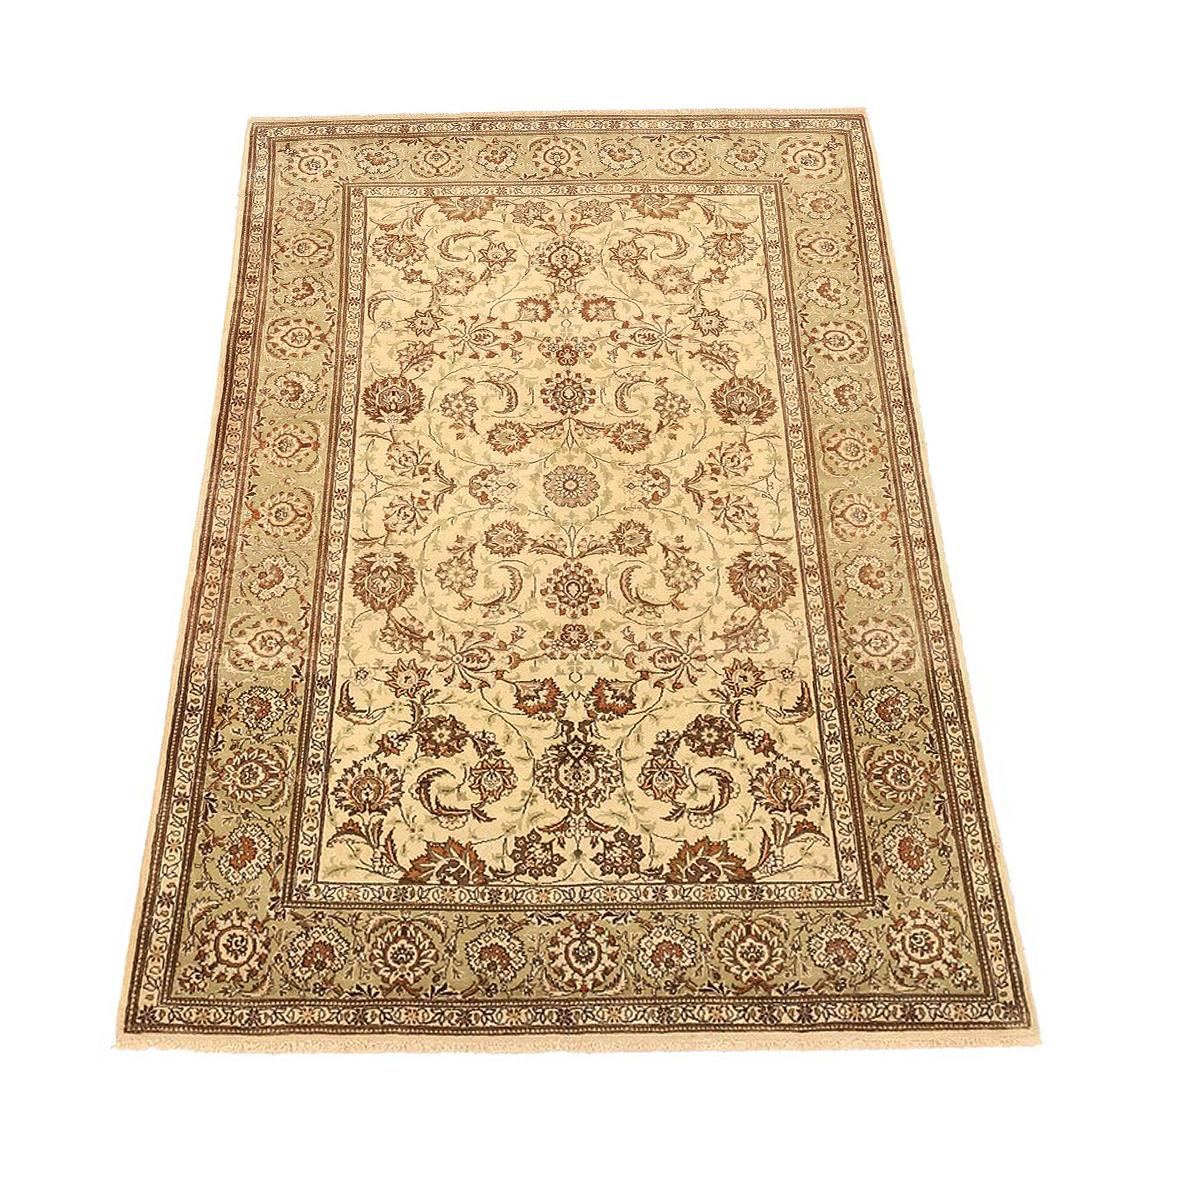 Antique Persian area rug from high-quality sheep’s wool and colored with eco-friendly vegetable dyes that are proven safe for humans and pets alike. It’s a traditional Kashan design showcasing a gorgeous ivory field with brown and white floral